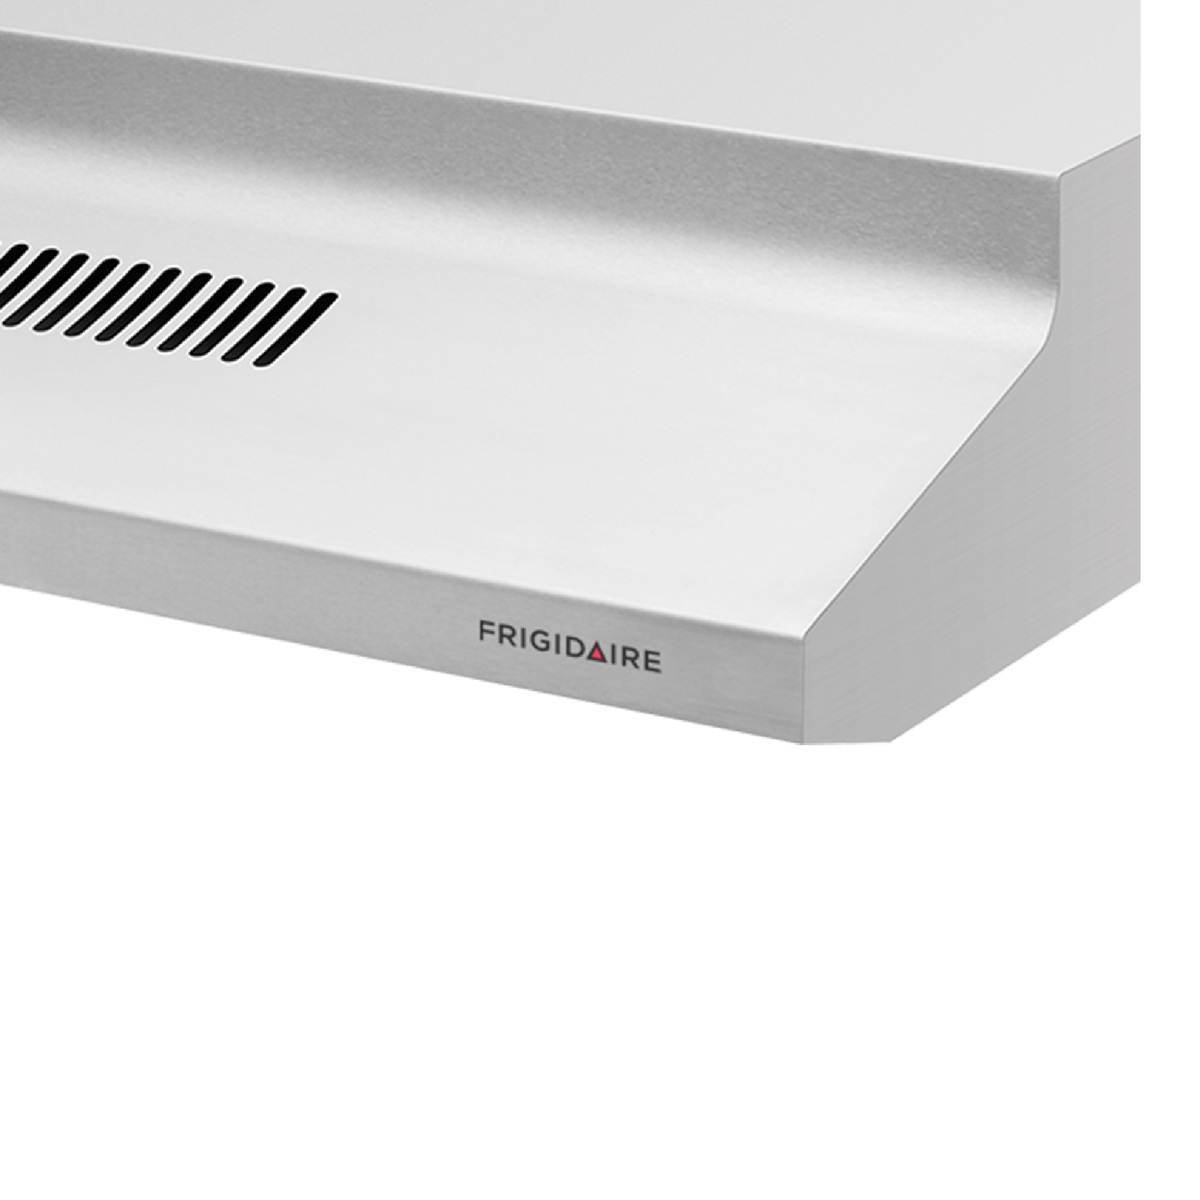 Frigidaire Traditional Under Cabinet Built In Cooker Hood, 90 cm, Stainless Steel, FRF910SA